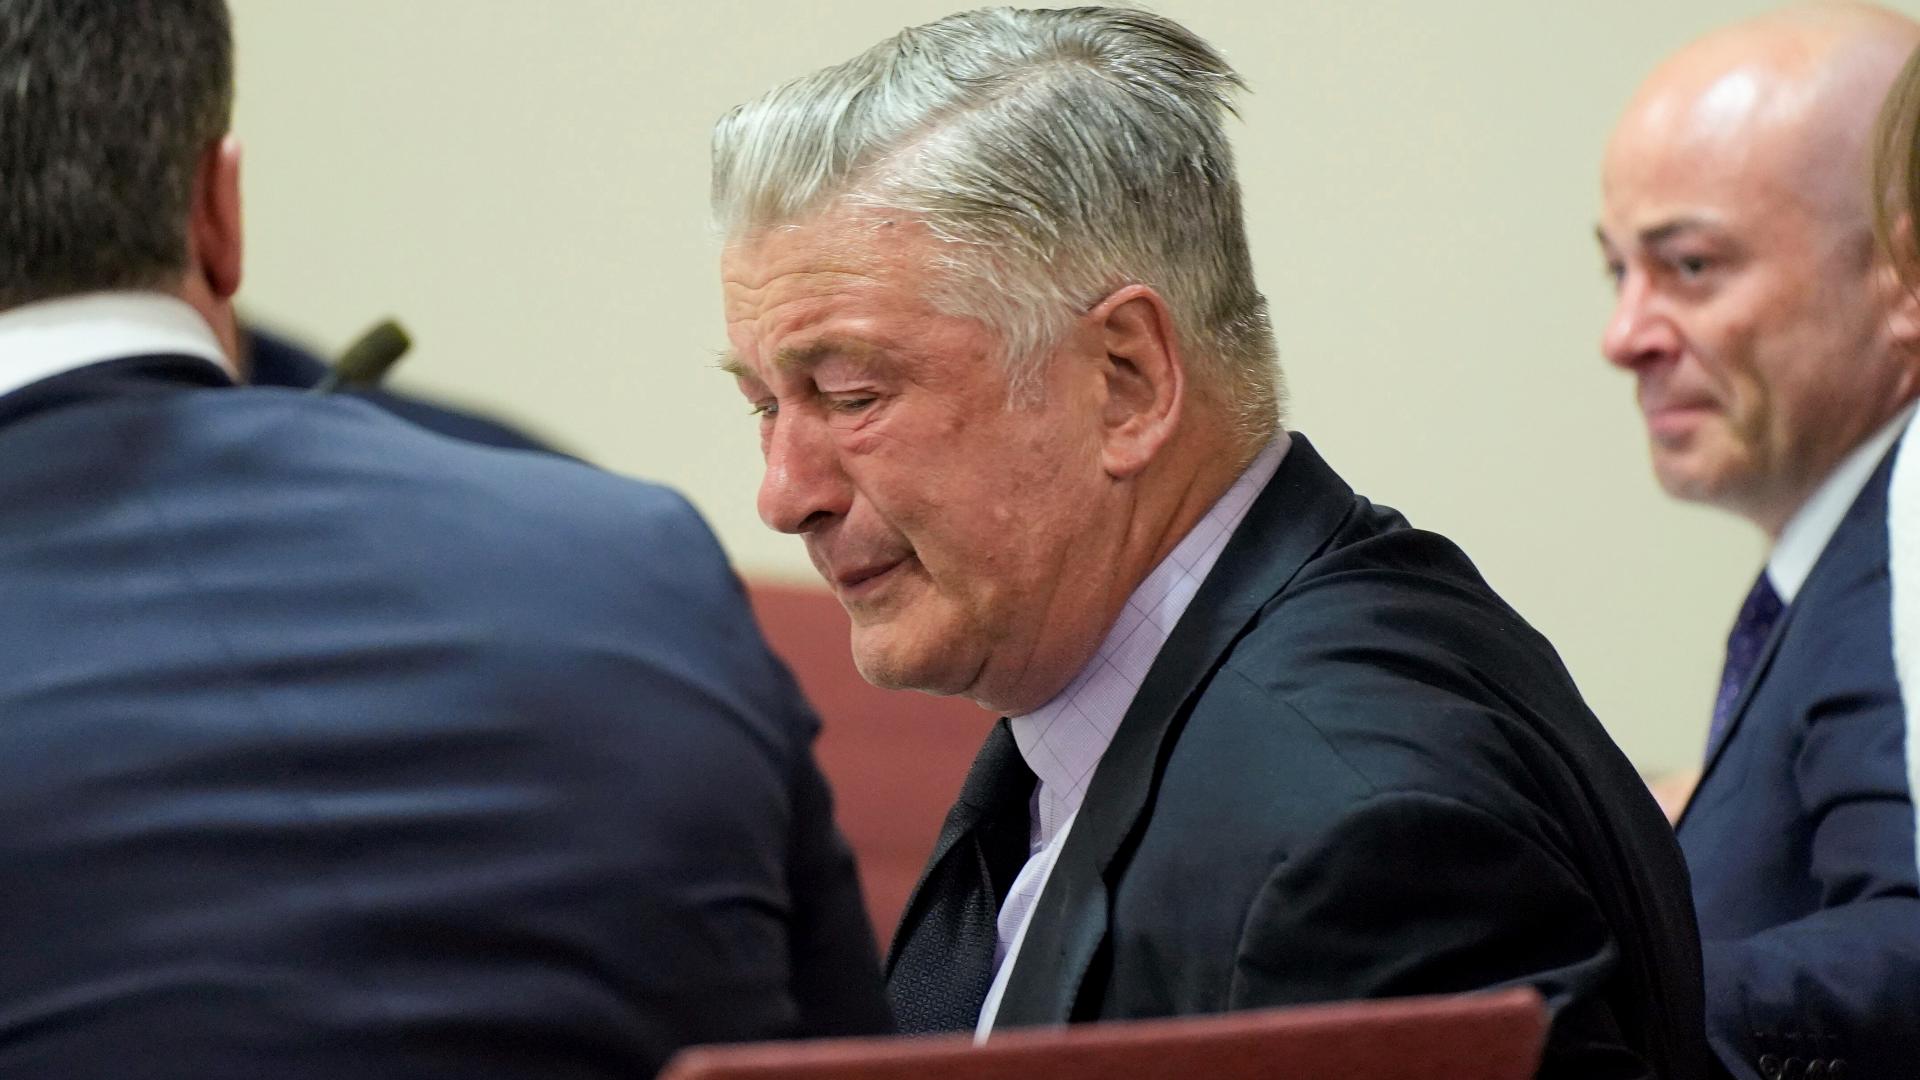 Alec Baldwin was brought to tears as the judge brought a sudden and stunning end to the involuntary manslaughter case against the actor.